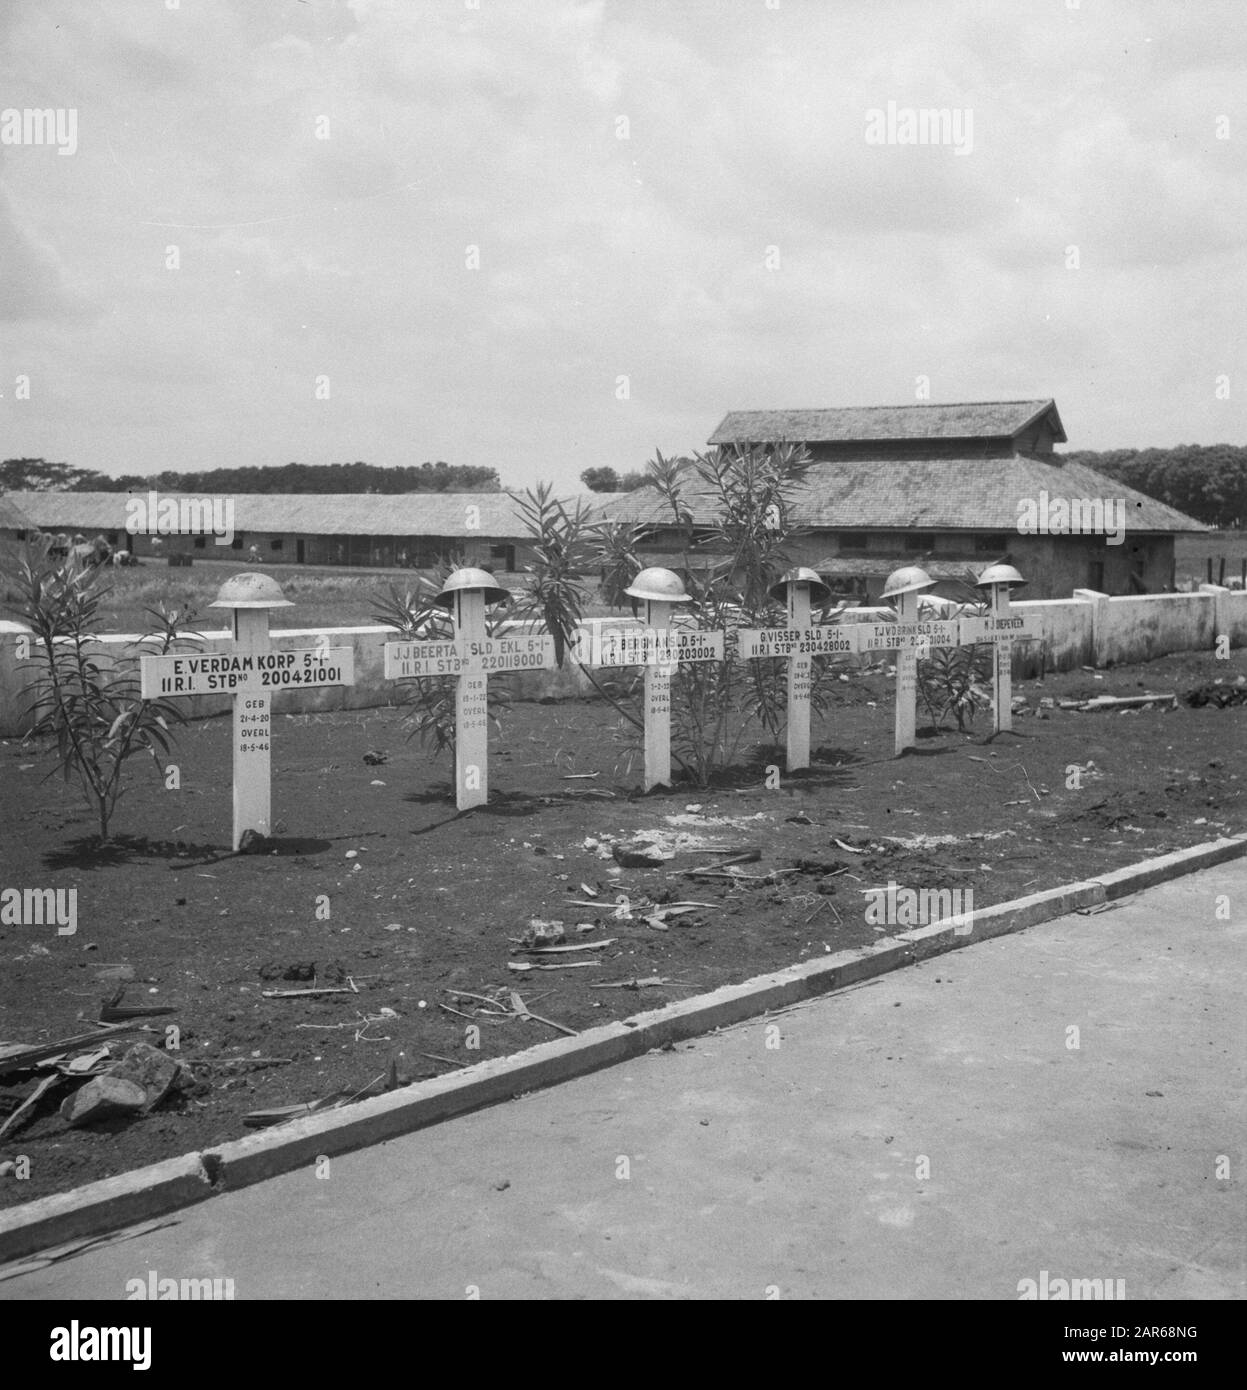 Crosses on graves of deceased Dutch soldiers at Tjilitan airport Annotation: On display are the graves of E. Verdam, corp 5-1-2 RI geb 21-4-1920, overl 18-5- 1946; J.J. Beerta sld 1st class 5-1-II RI born 19-1-1922 and 18-5-1946; P. Bergman sld 5-1-II RI gebe 3-2-1922 and 18-5-1946; G. Visser sld 5-1-II RI born 28-4-1923 and 18-5-1946 T.J. v.d. Brink, sld 5-1-II RI b 31-5-1946 26 and 18-5-1946. M J. Diepeveen born 19-12-1921 and 18-5-1946. soldiers killed from a patrol ambushed at Pesing. They were buried on 21 May 1946 Date: September 1947 Location: Indonesia, Dutch East Indies Stock Photo